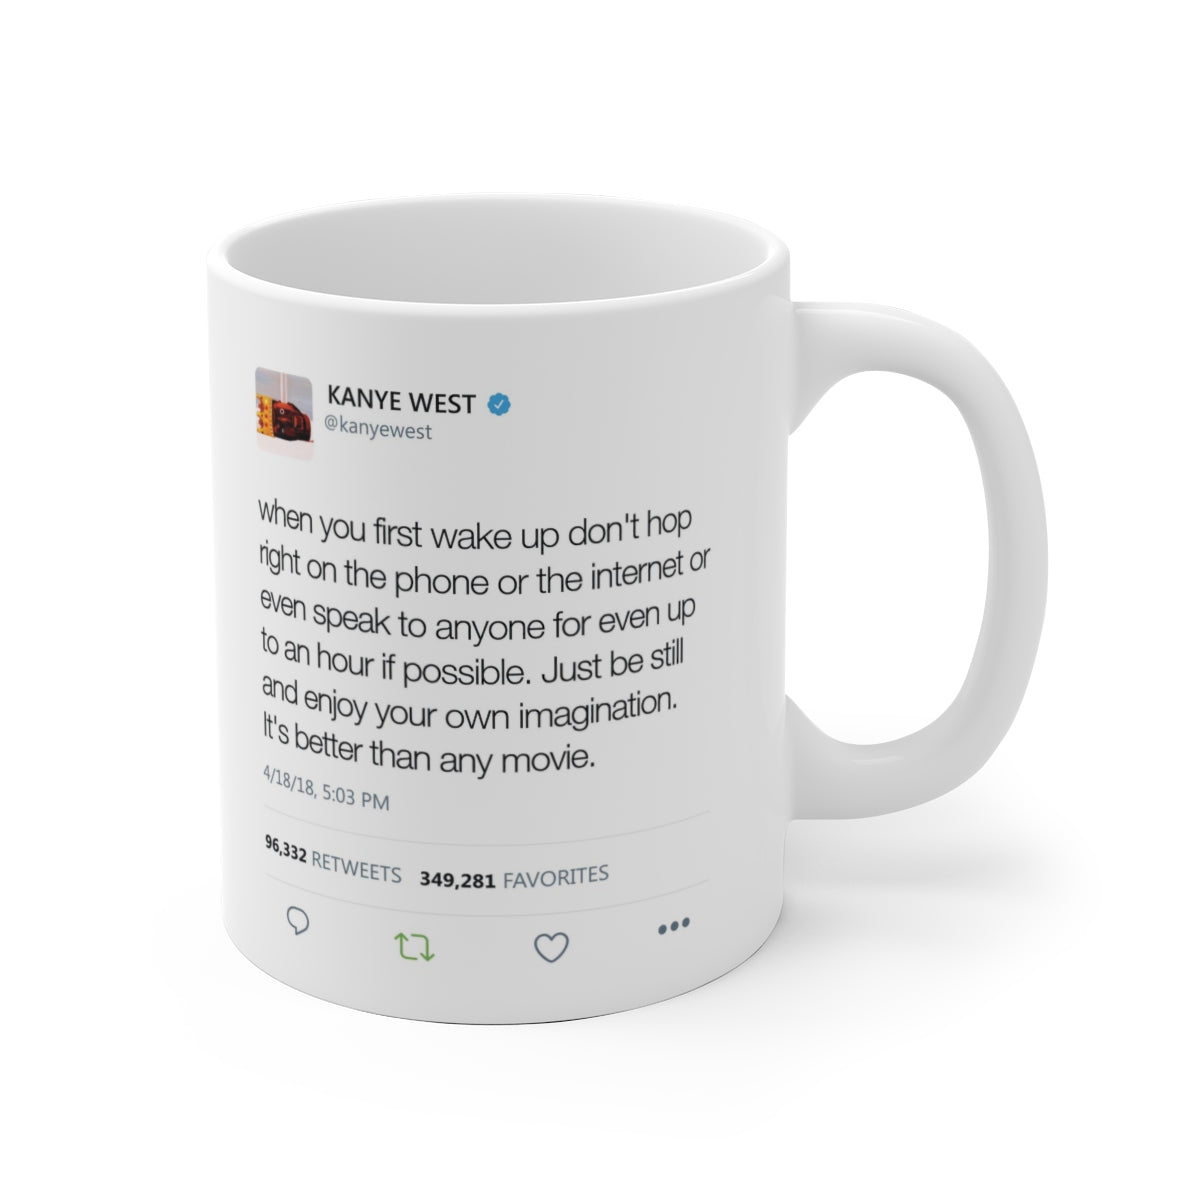 When you first wake up don't hop right on the phone - Kanye West Tweet Mug-Archethype